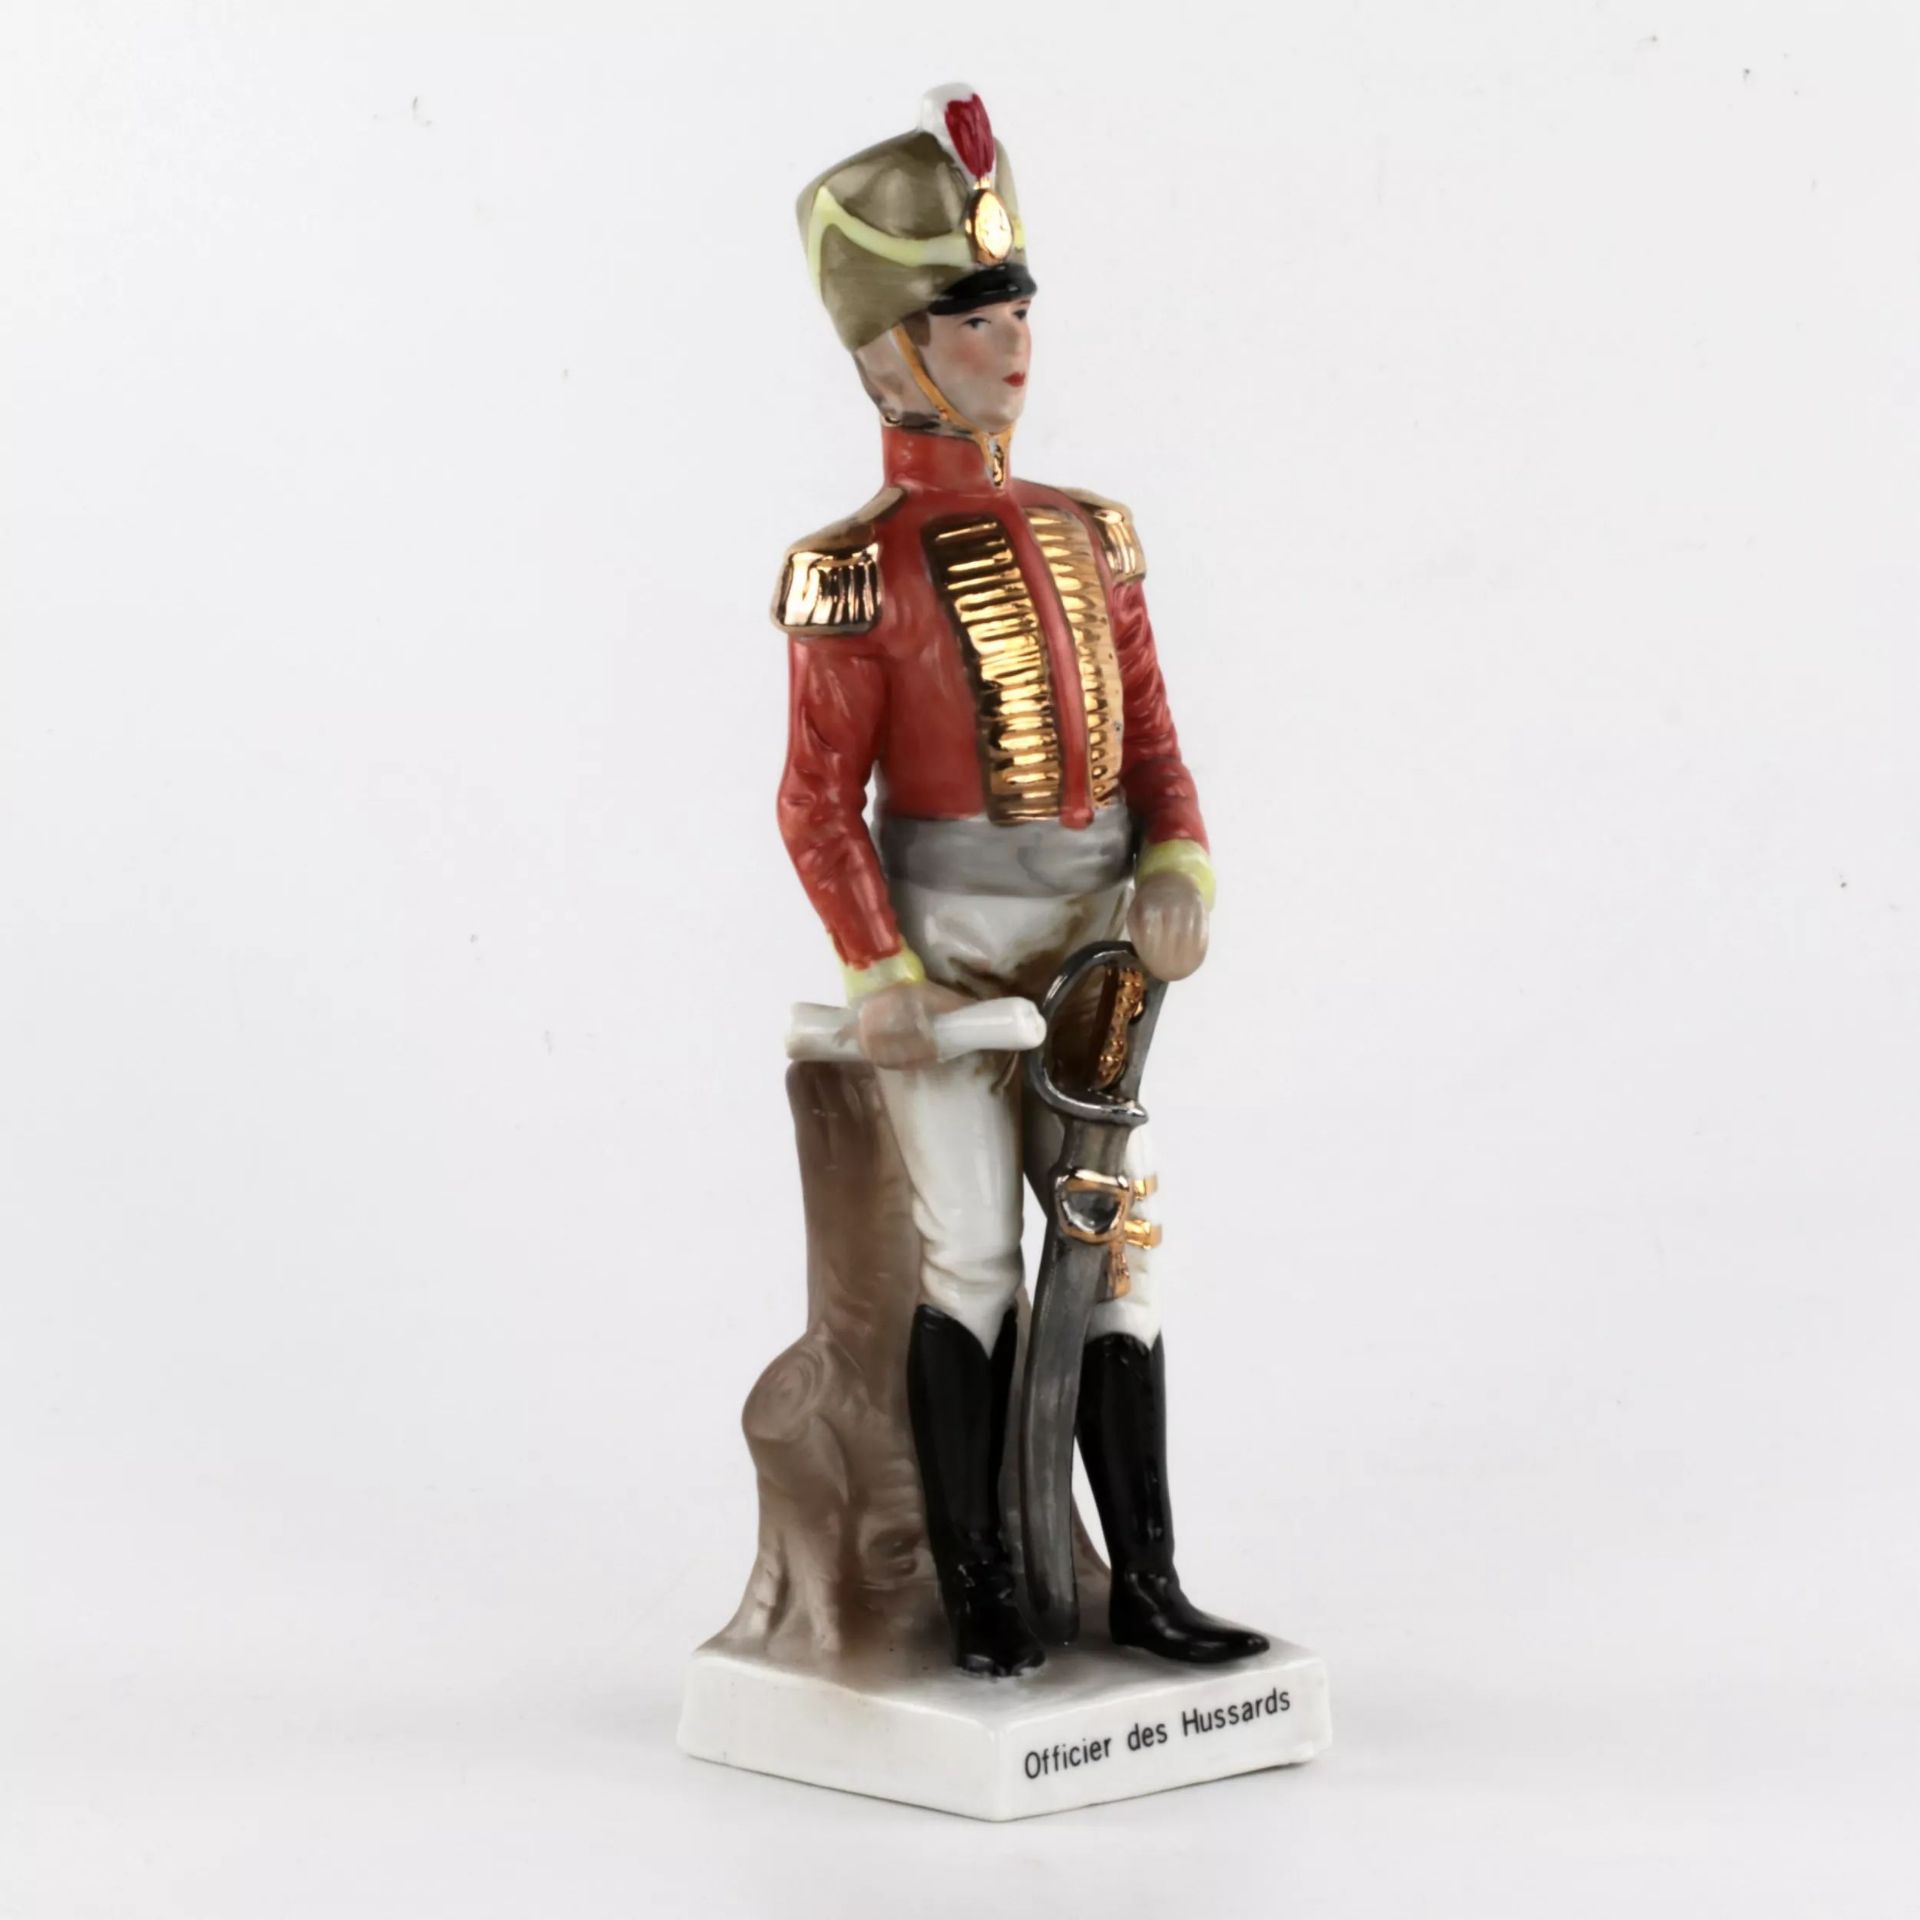 Porcelain figurine "Hussar with a report". - Image 5 of 6